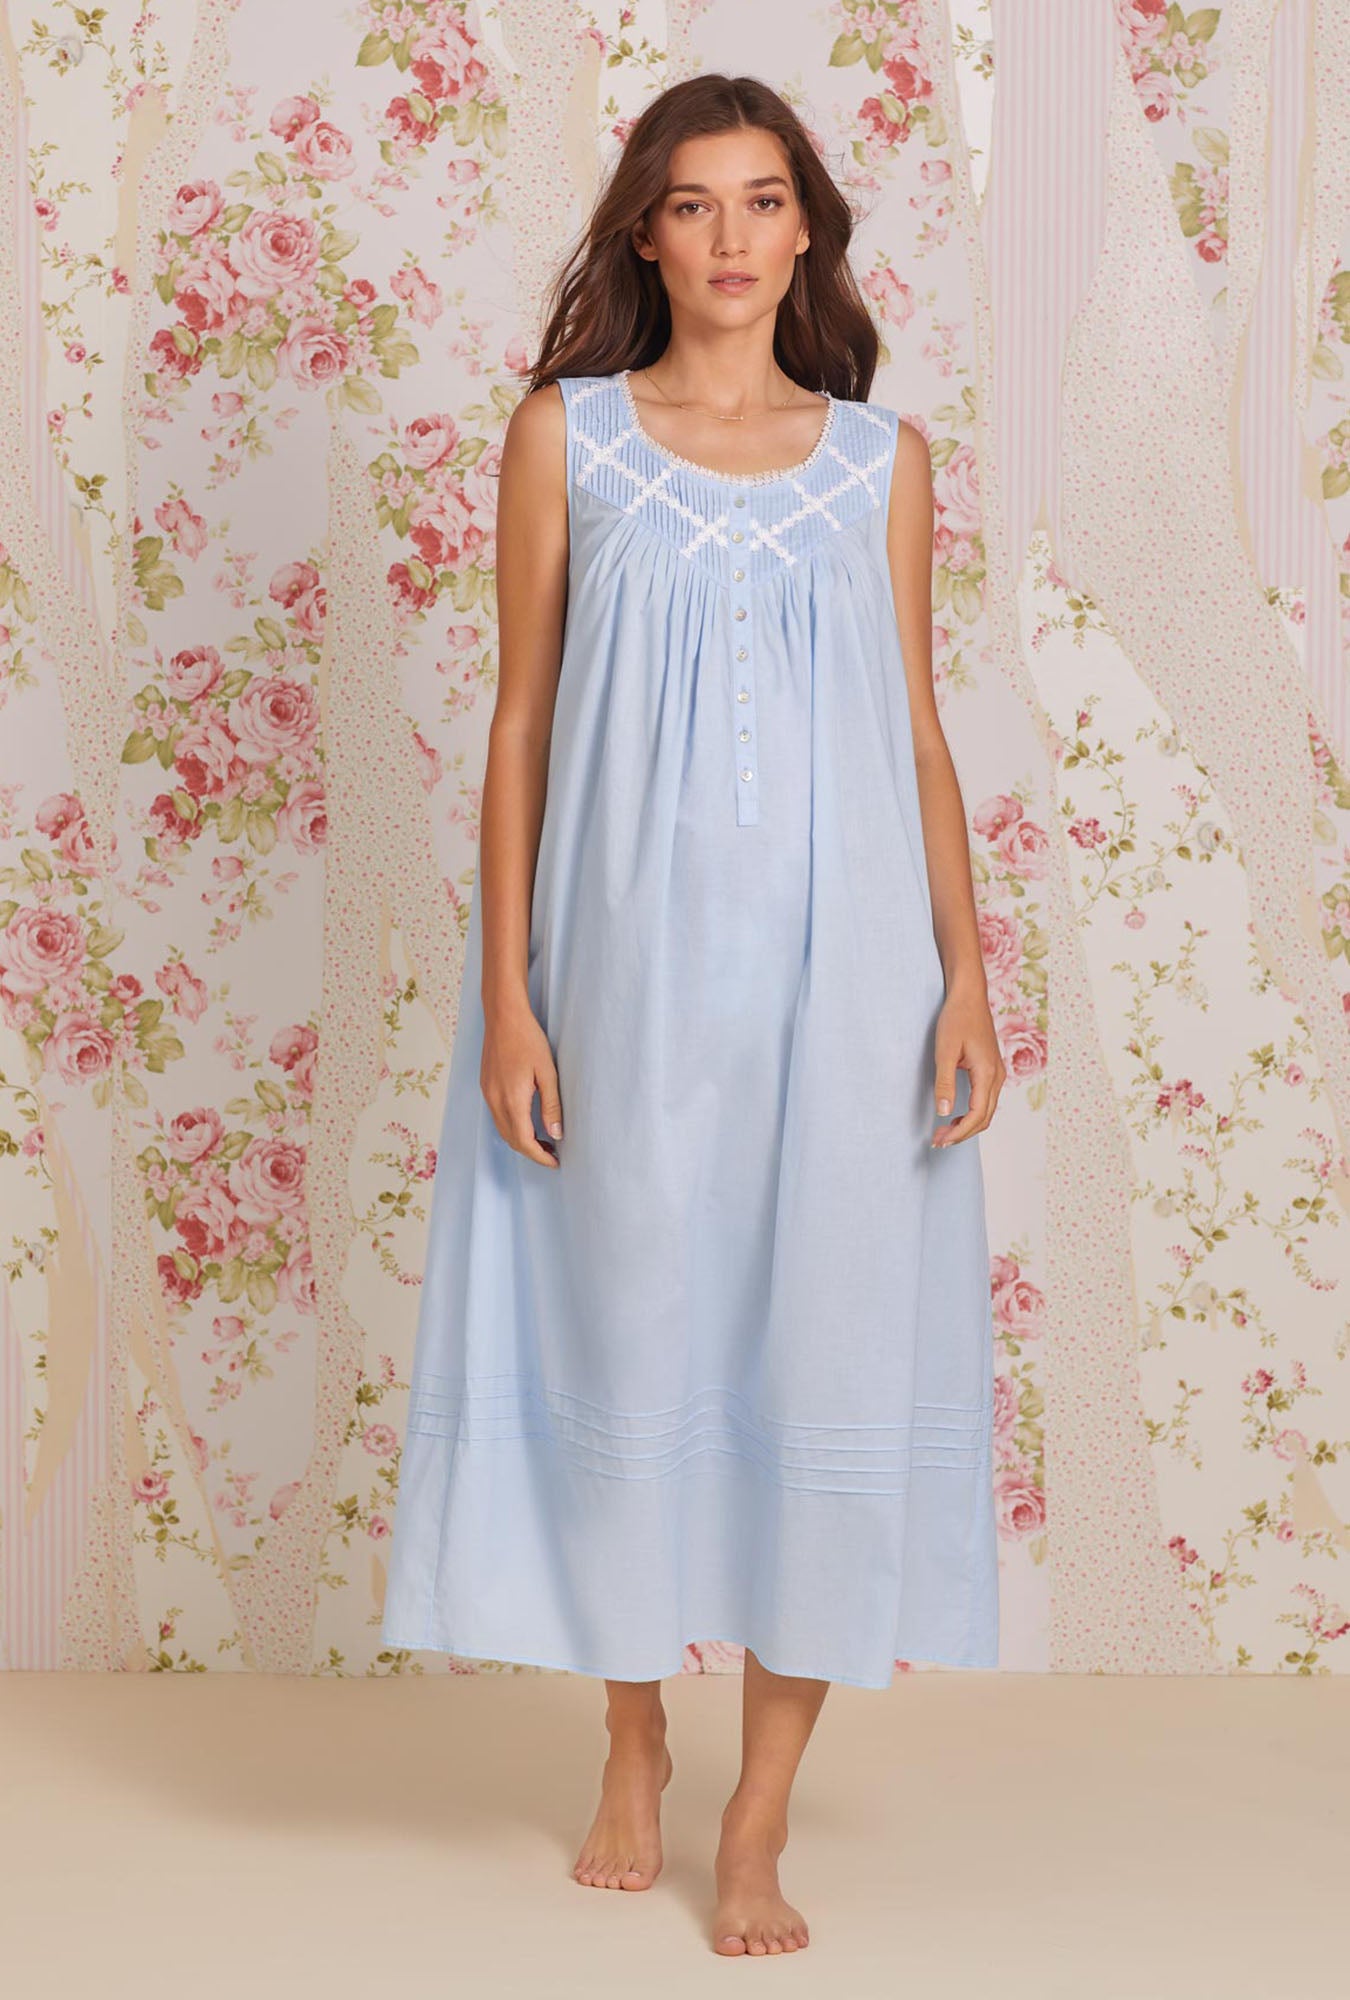 NWT $62 Eileen West Nightgown SMALL Pink & Blue Hydrangea Floral  Poly/Cotton